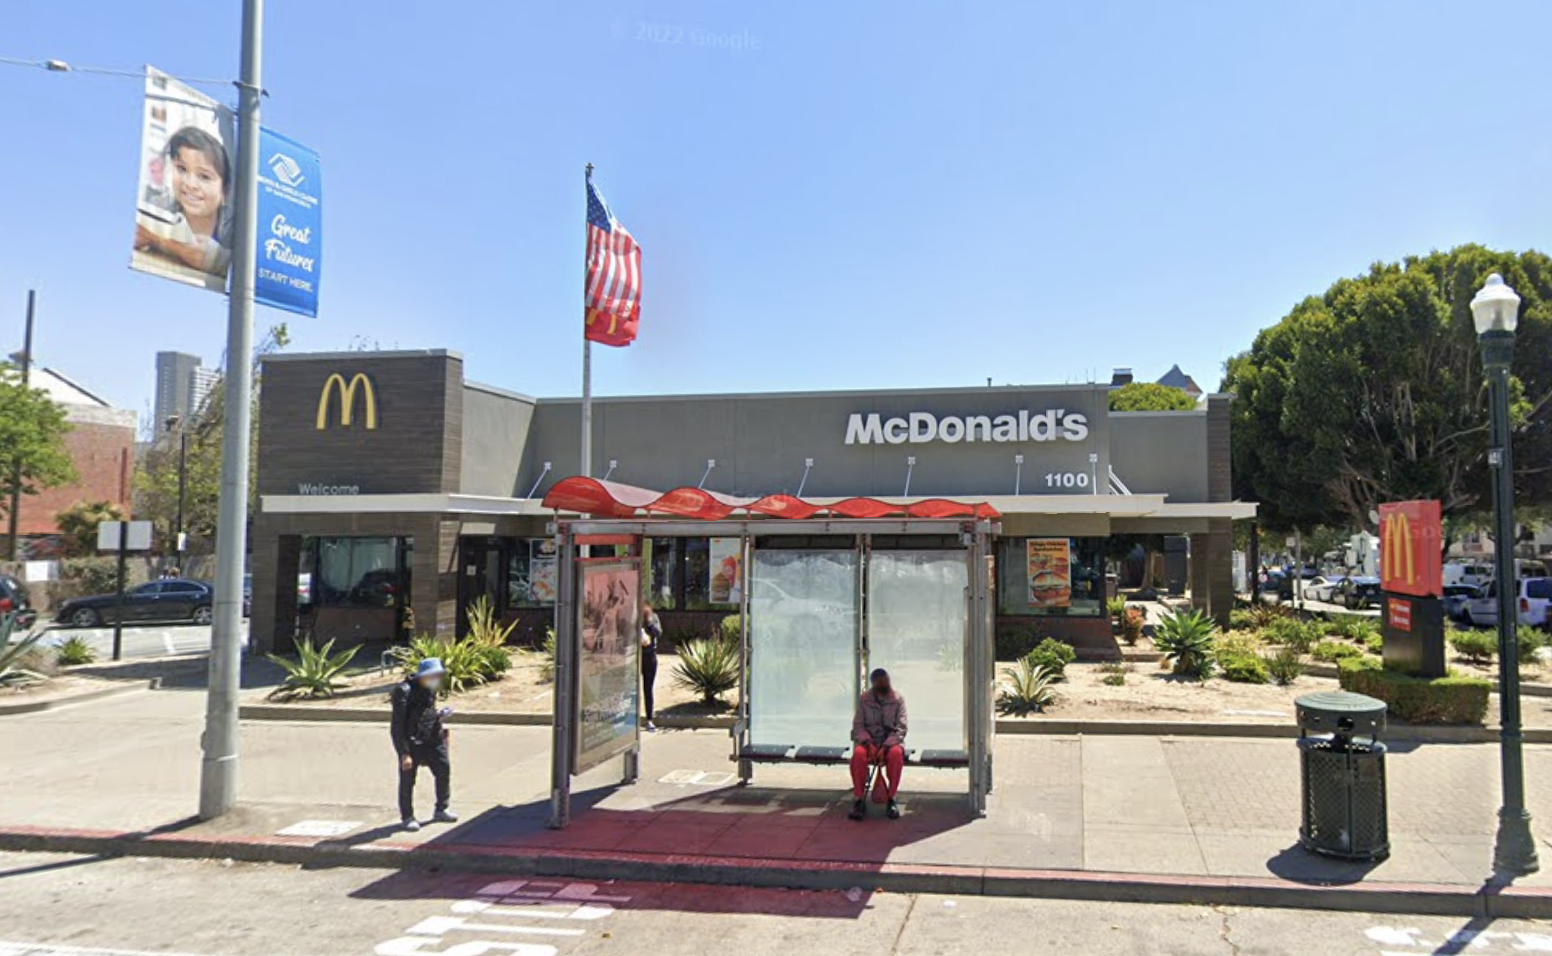 Woman Sues San Francisco McDonald’s After Being Burned by Hot Coffee